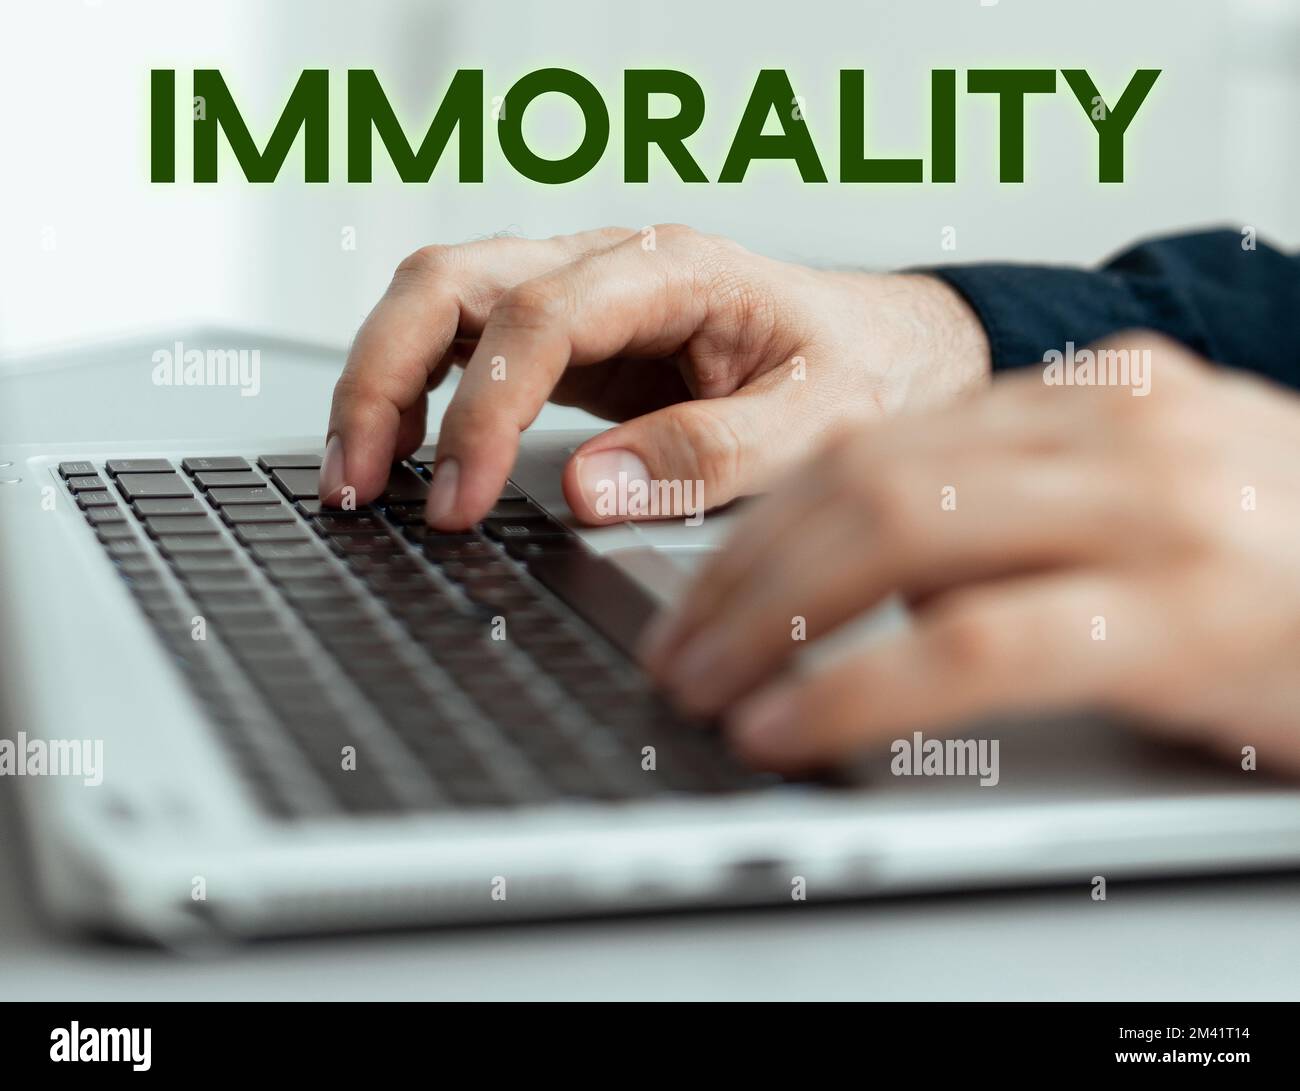 Text sign showing Immorality. Business concept the state or quality of being immoral, wickedness Stock Photo